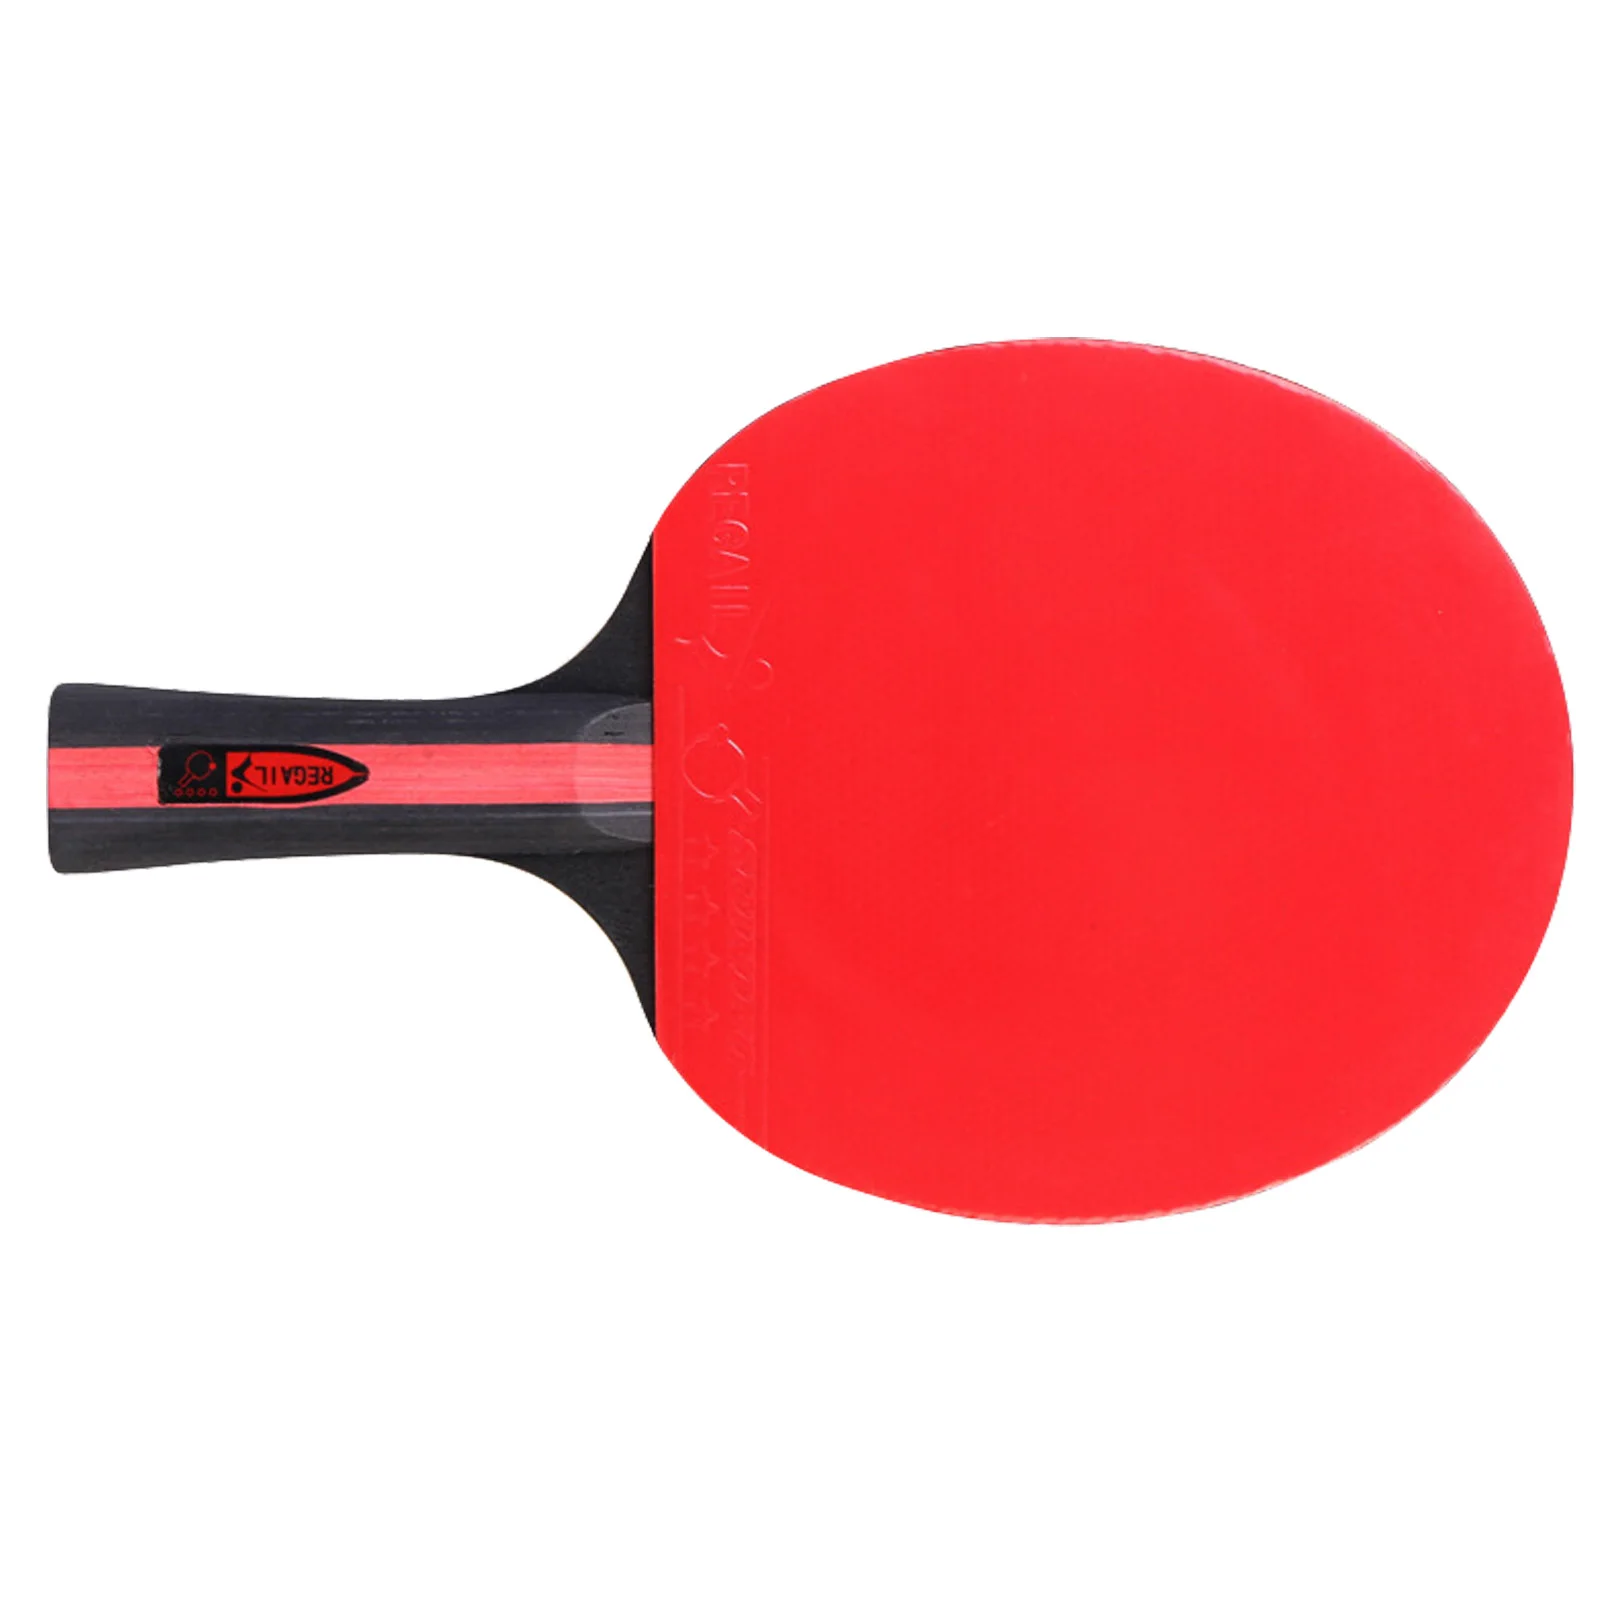 

Ping-Pong Racquet Professional Table Tennis Racket Excellent Spin And Control Comfortable Table Tennis Racquet Bat For Beginner